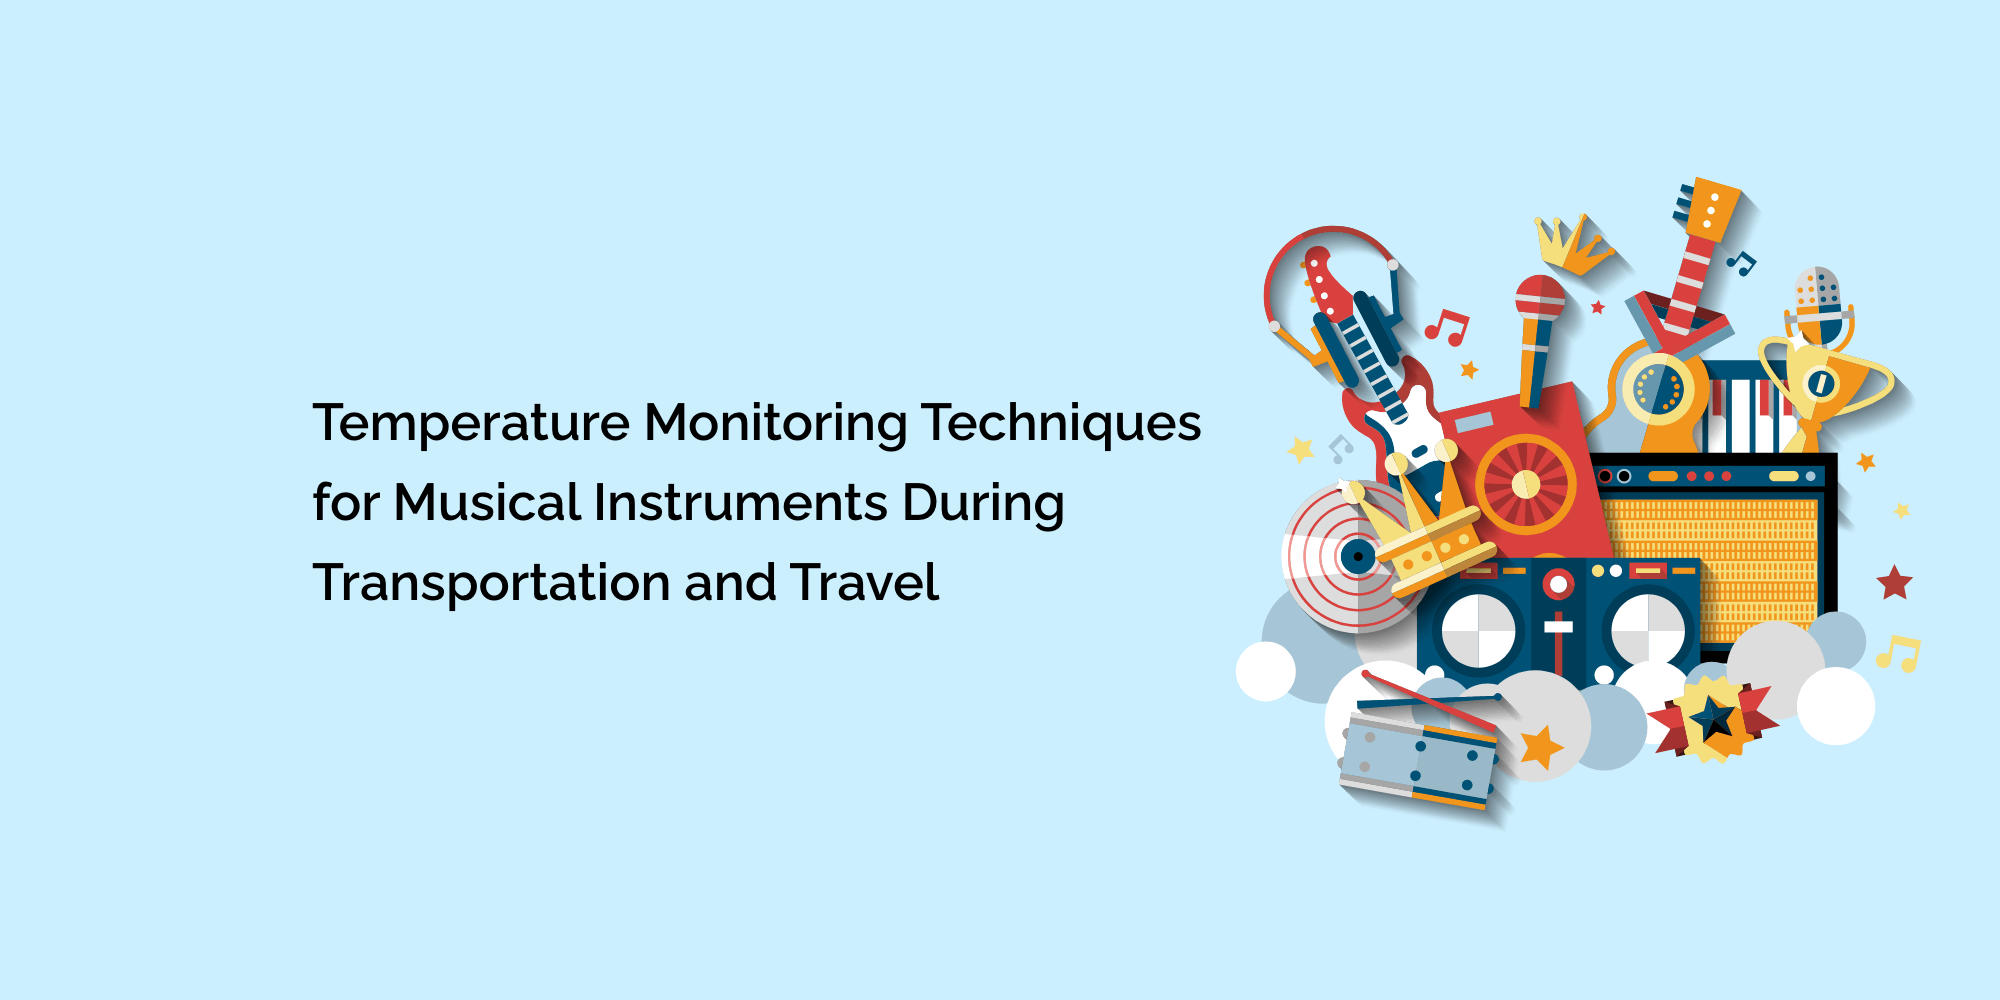 Temperature Monitoring Techniques for Musical Instruments During Transportation and Travel